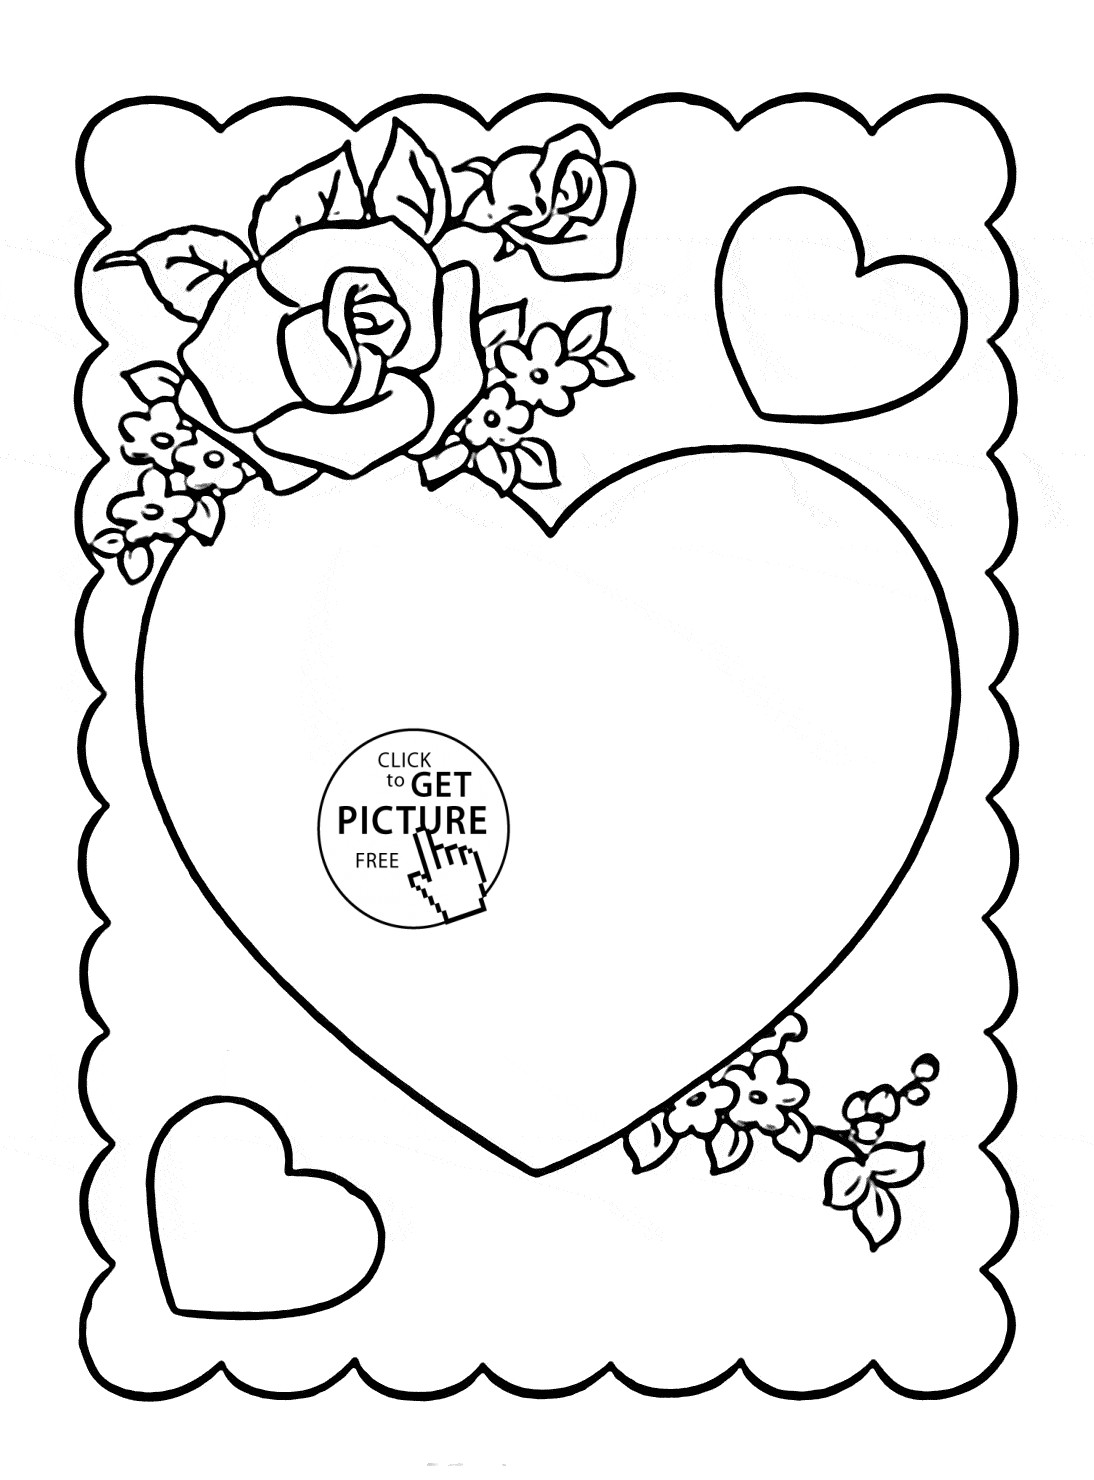 Valentines Coloring Pages For Girls
 Hearts Valentine With Flowers Coloring Page For Kids For